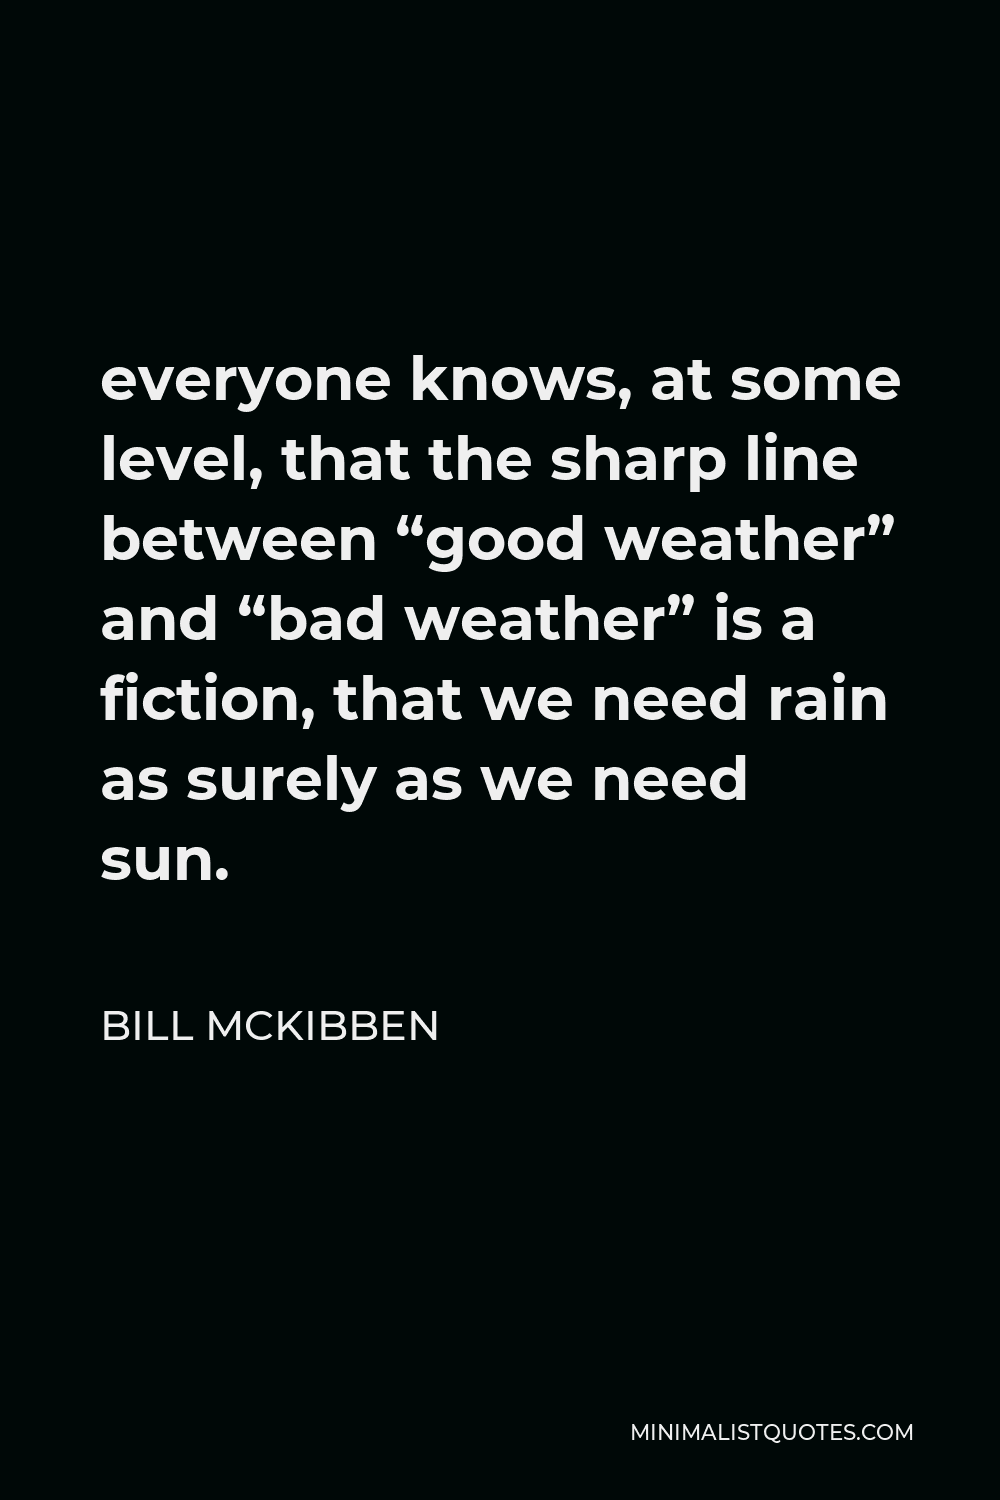 Bill McKibben Quote - everyone knows, at some level, that the sharp line between “good weather” and “bad weather” is a fiction, that we need rain as surely as we need sun.